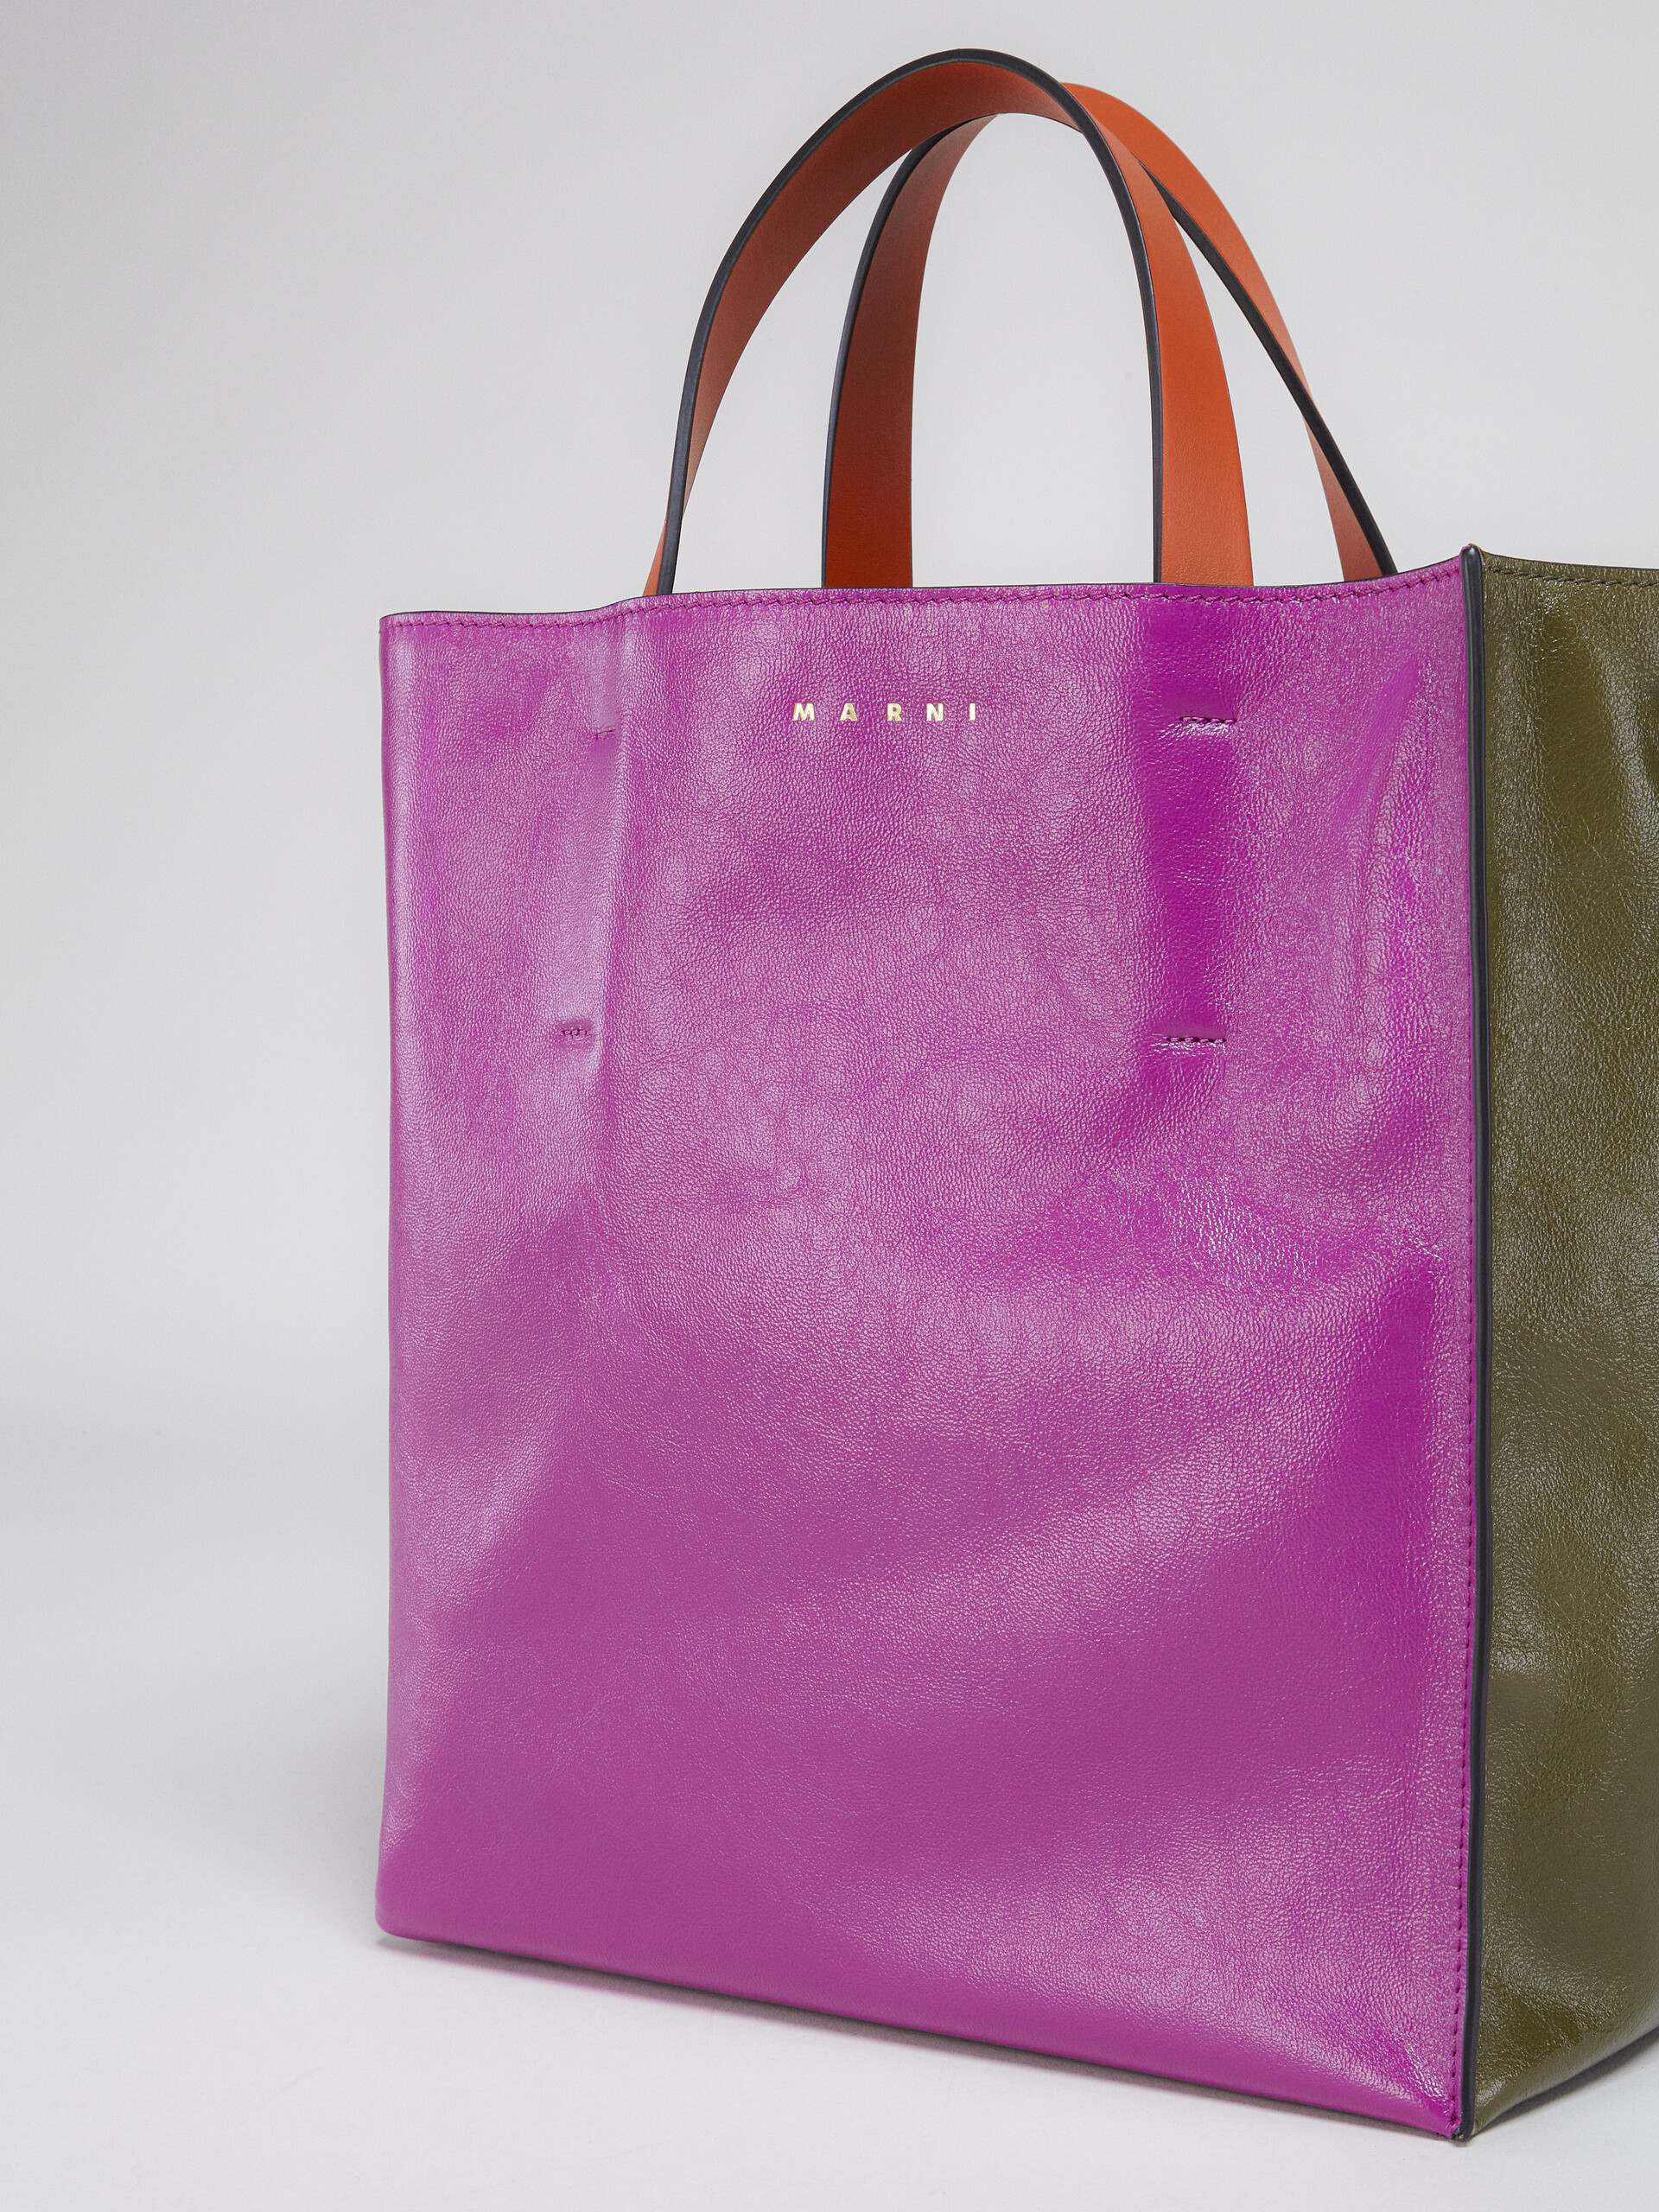 MUSEO SOFT small bag in fuchsia and green leather - Shopping Bags - Image 4